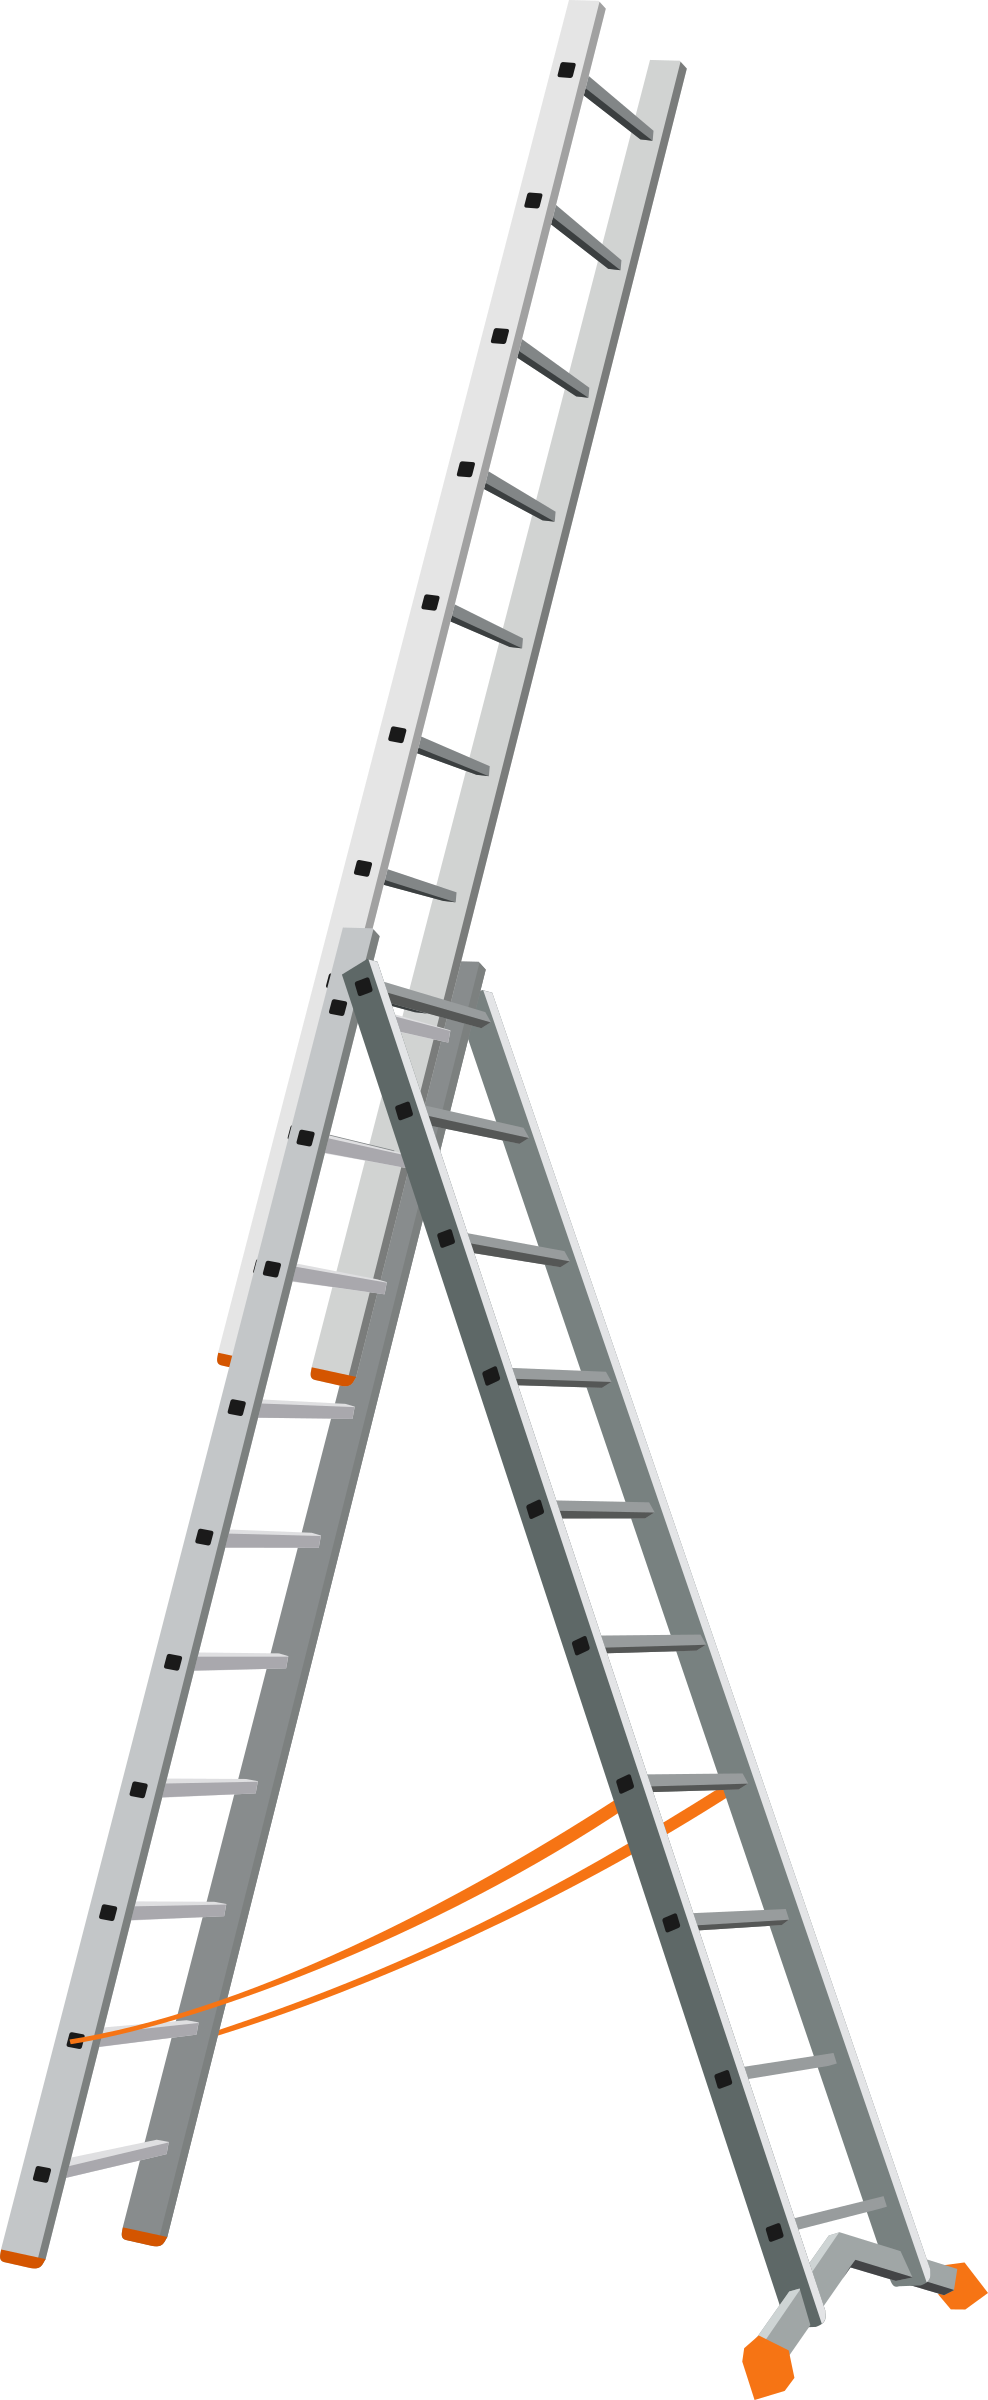 ladder clipart tall ladder ladder tall ladder transparent for download webreview #29211